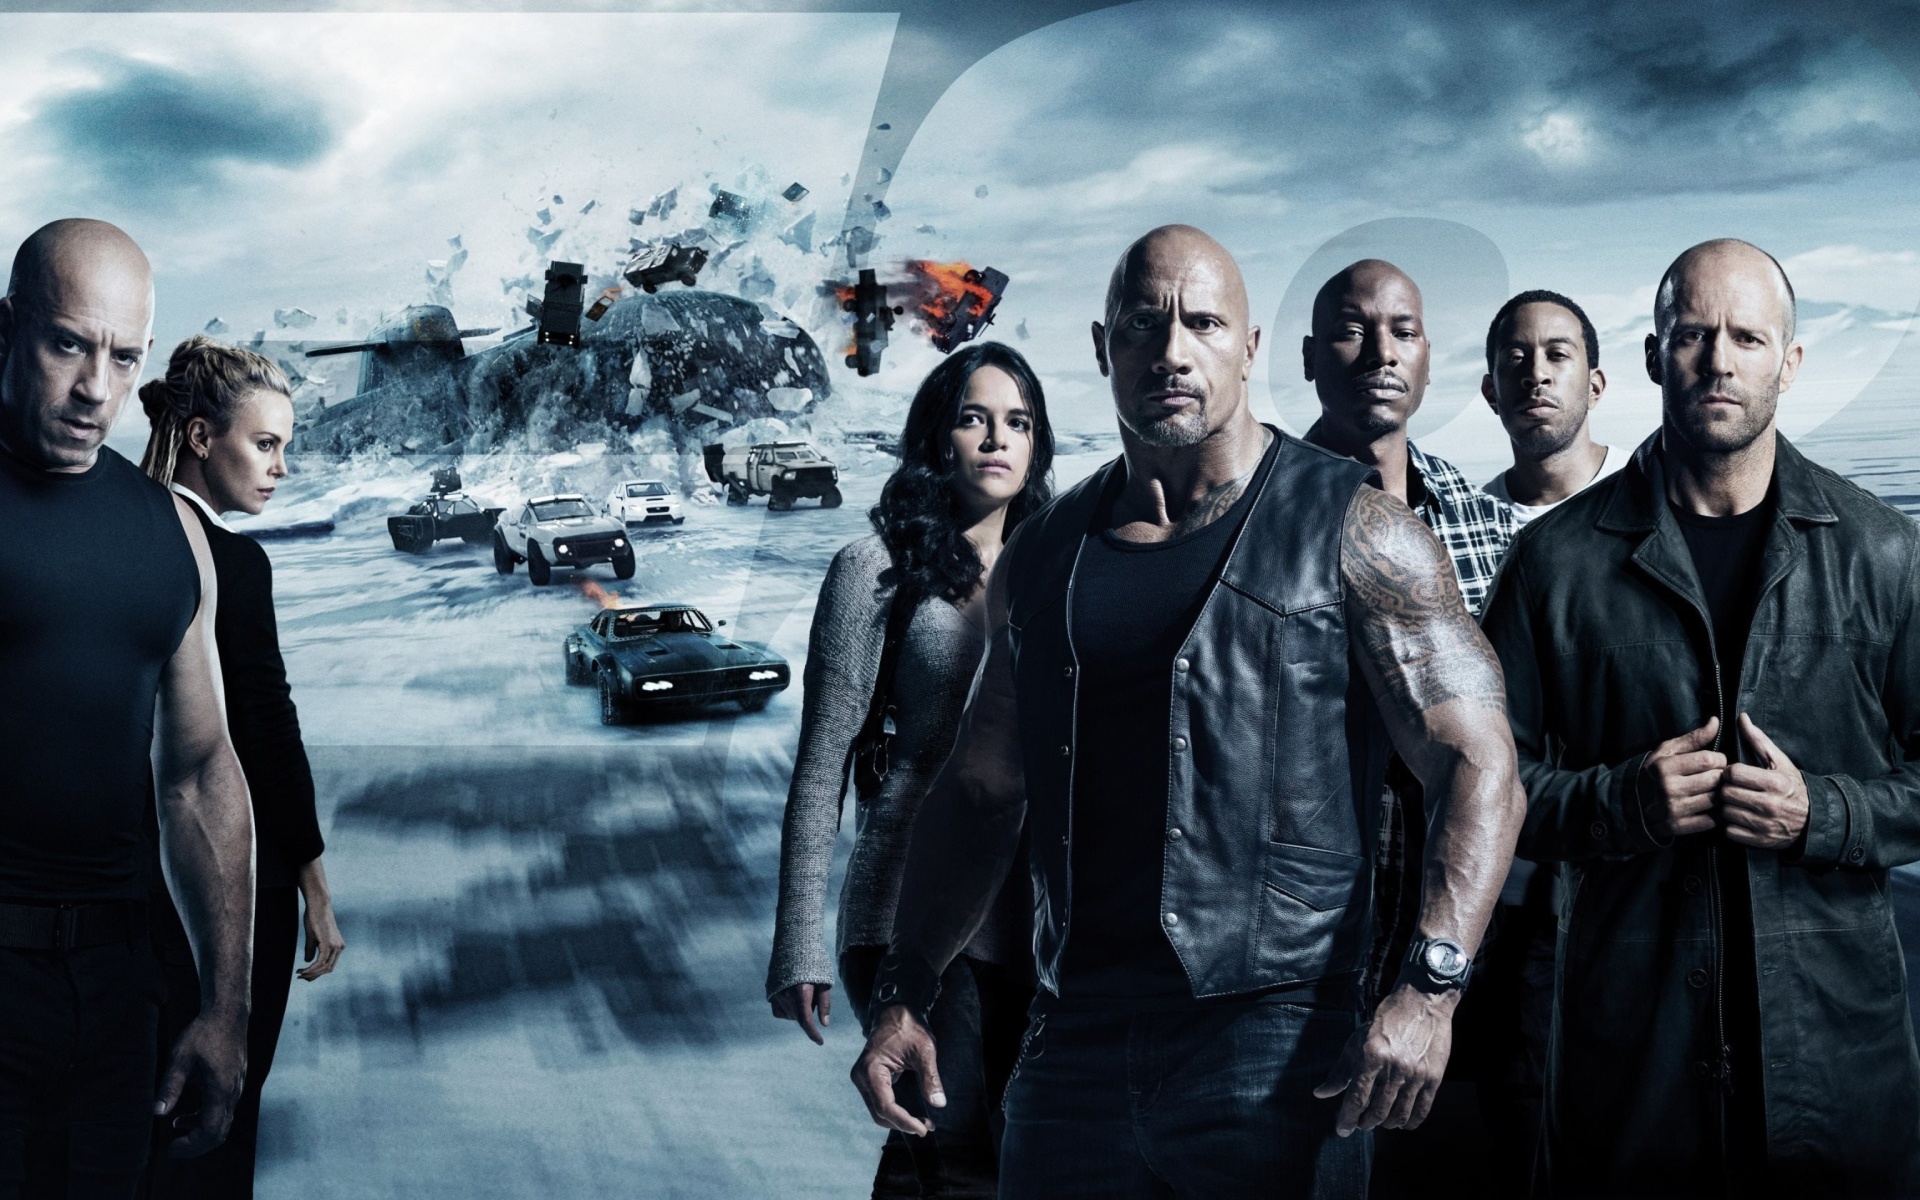 The Fate of the Furious with Vin Diesel, Dwayne Johnson, Charlize Theron screenshot #1 1920x1200